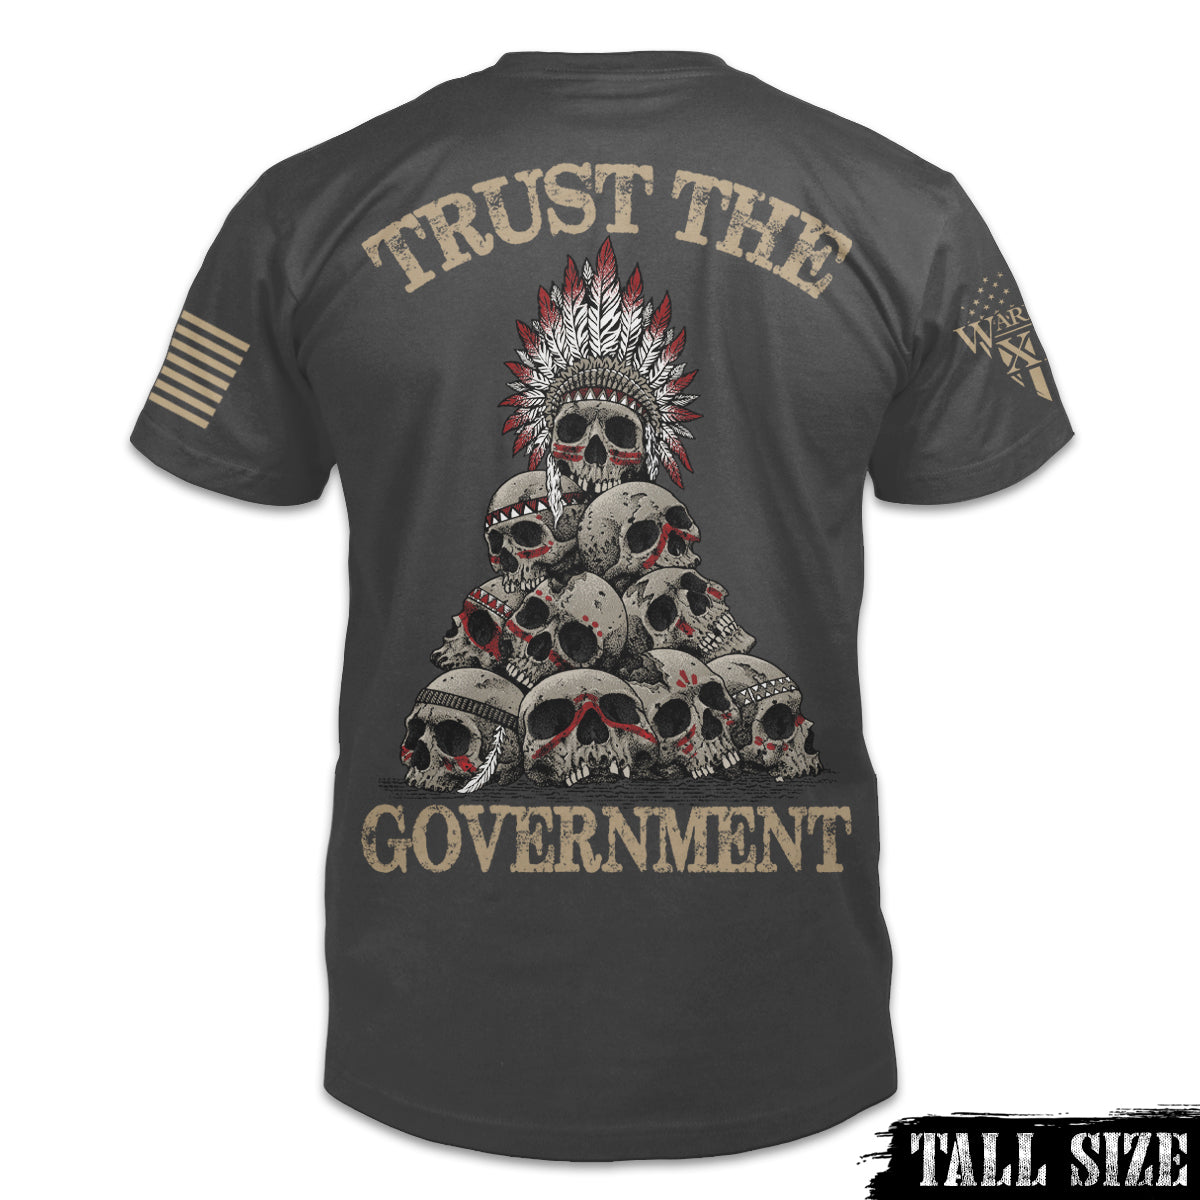 A dark grey tall size shirt with the words "Trust the government" printed on the back of the shirt.